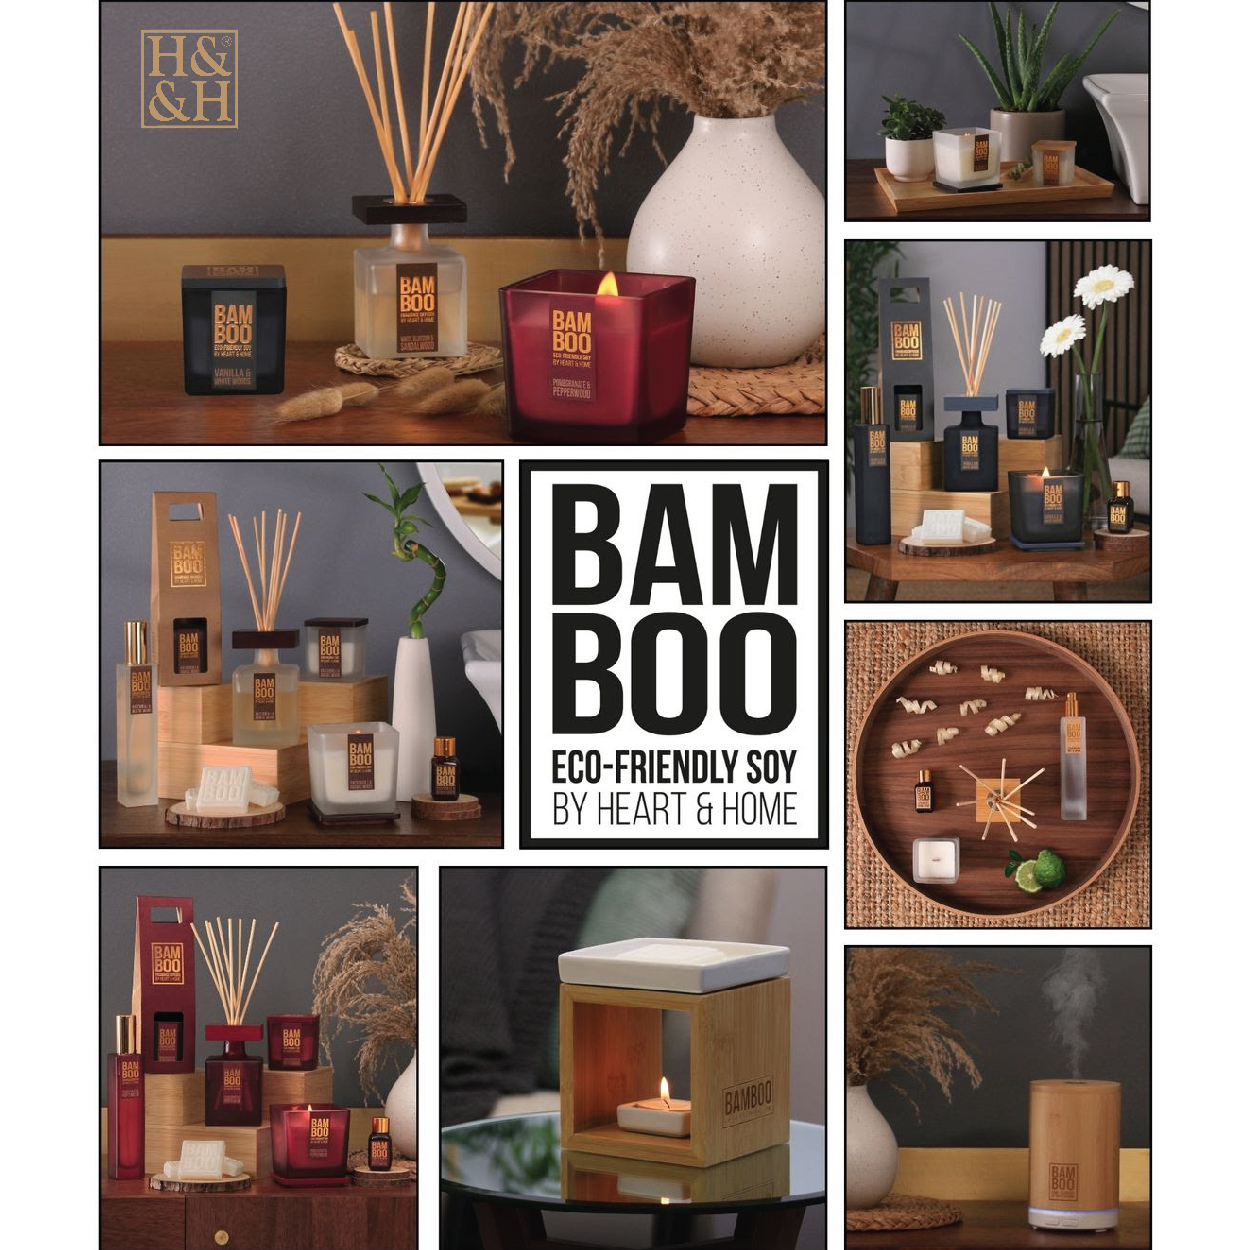 H&H Bamboo Eco-friendly Collection